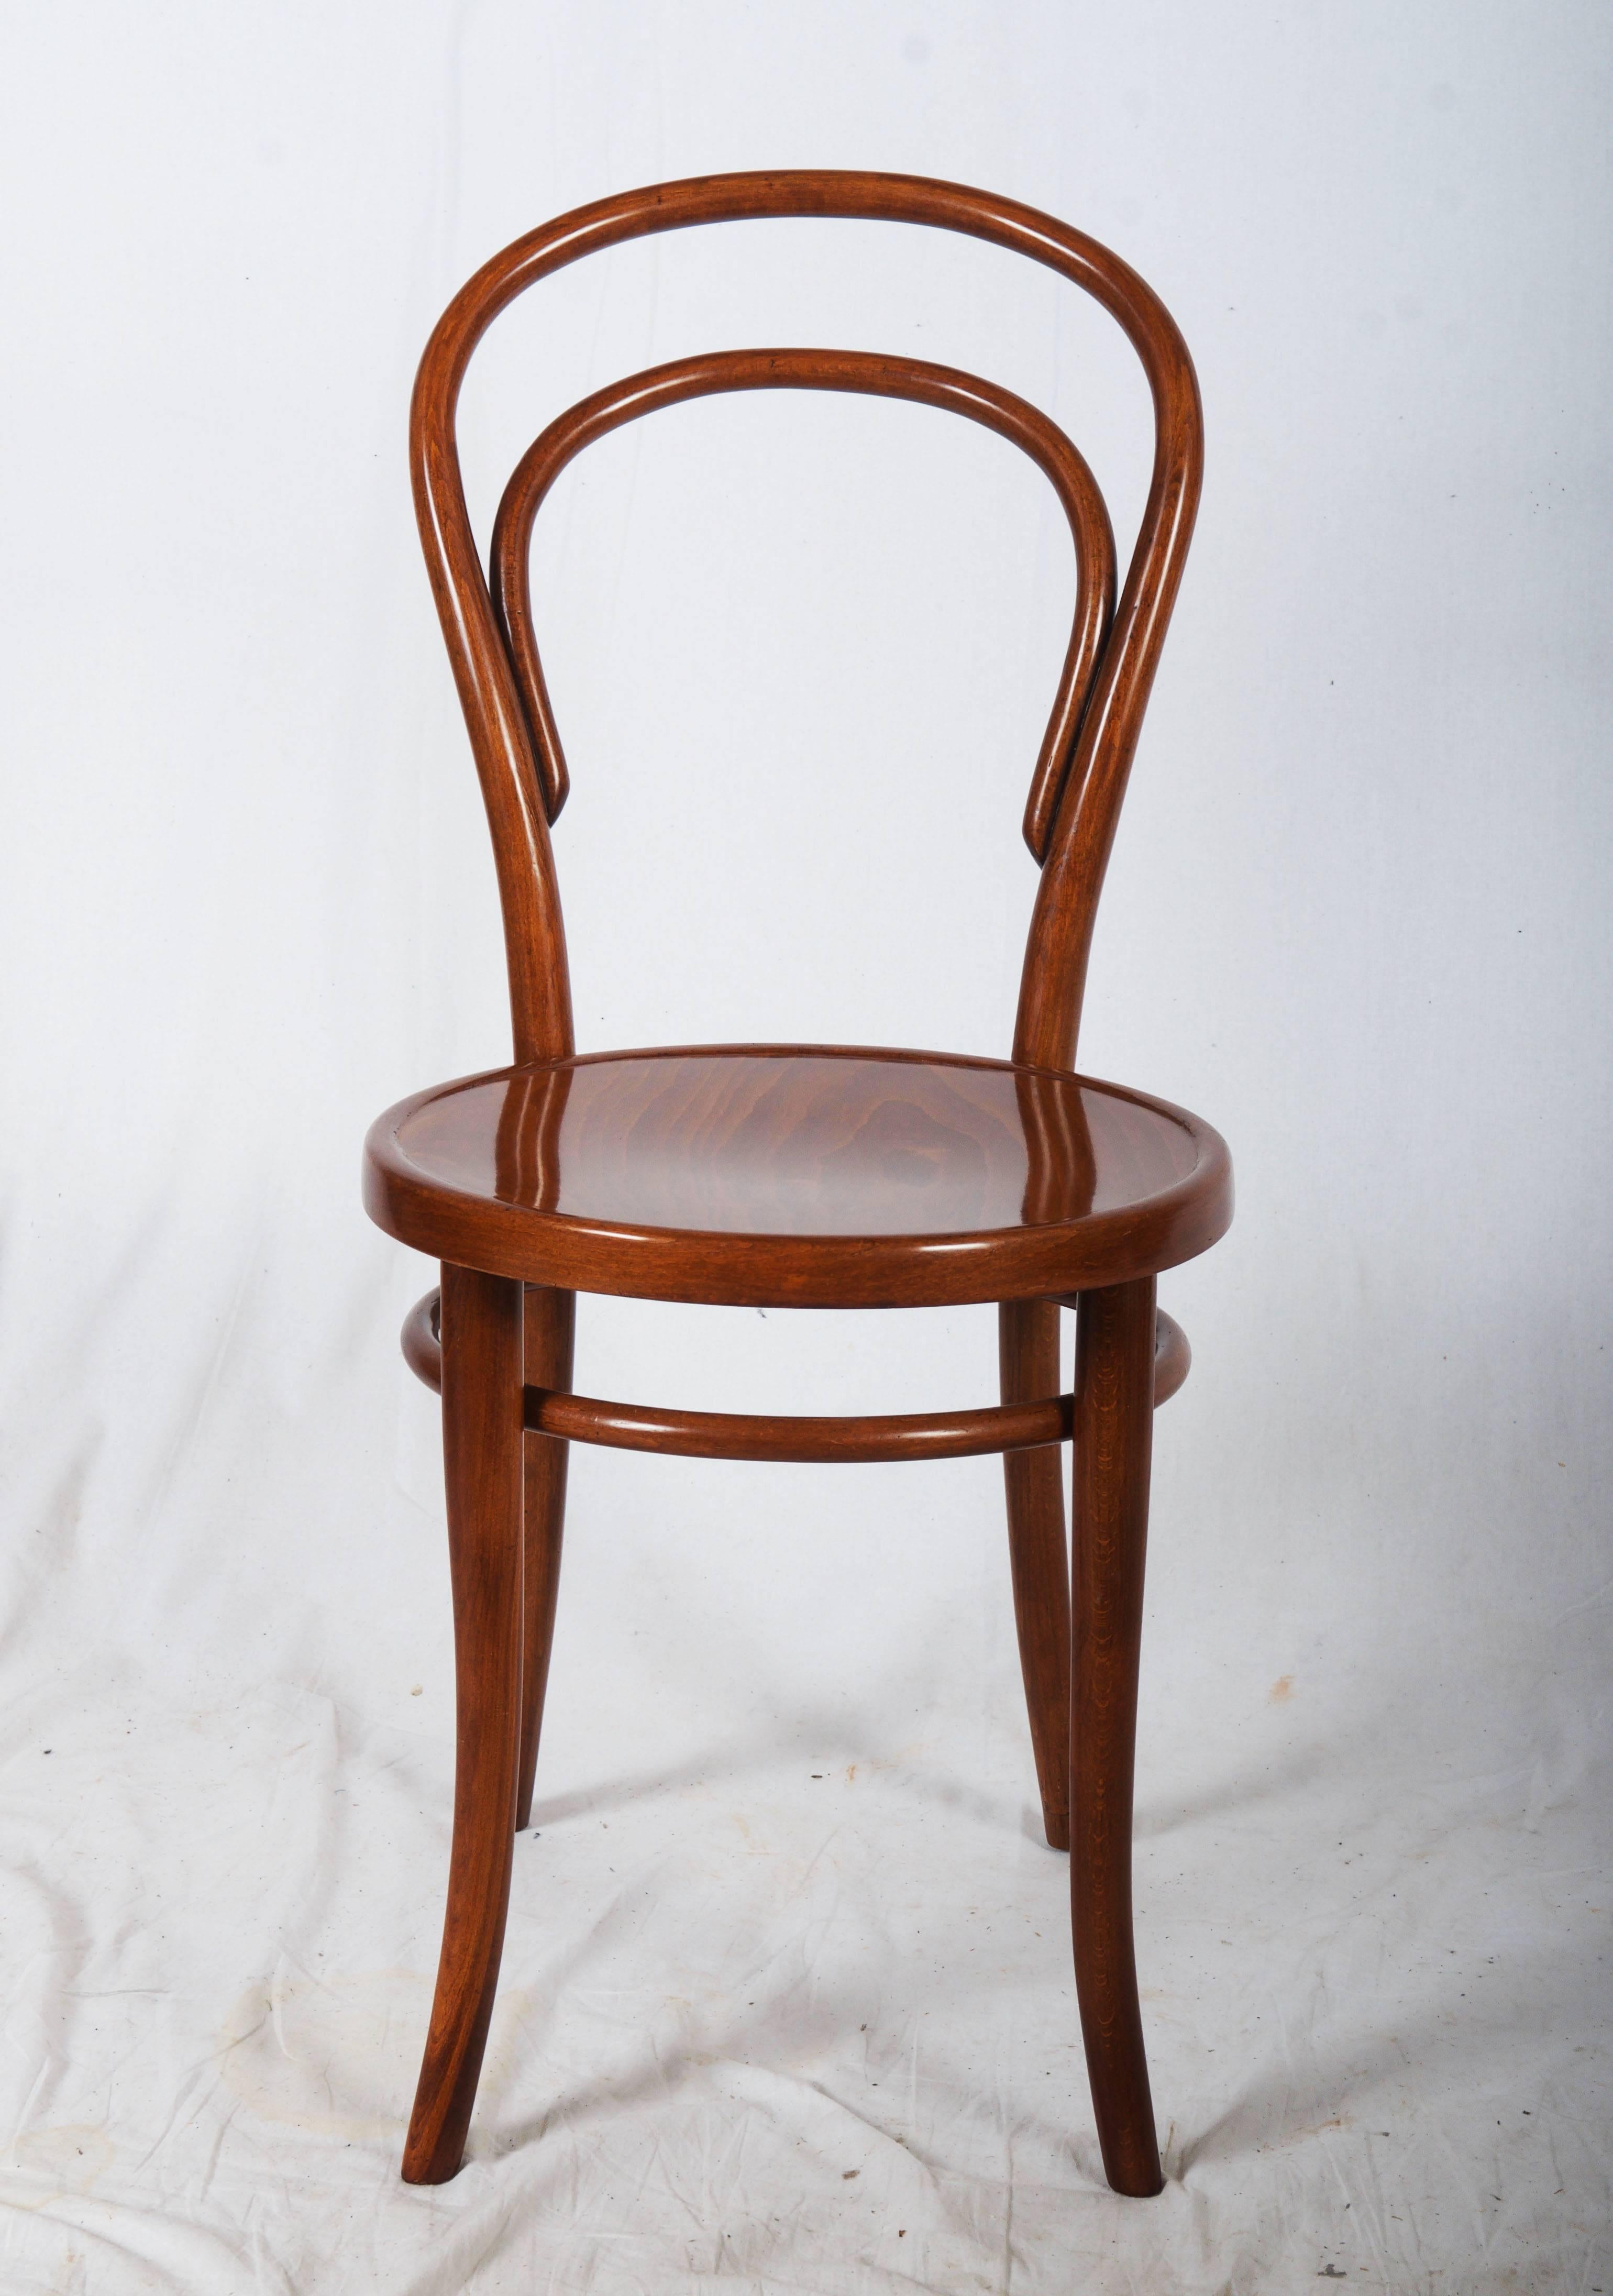 Beech, bentwood signed on the frame Gebrüder Thonet catalog no. 14.
Perfectly restored, the color can be changed on request.
One price is already restored delivery time for the rest about 4-6 weeks.
Up to six available.